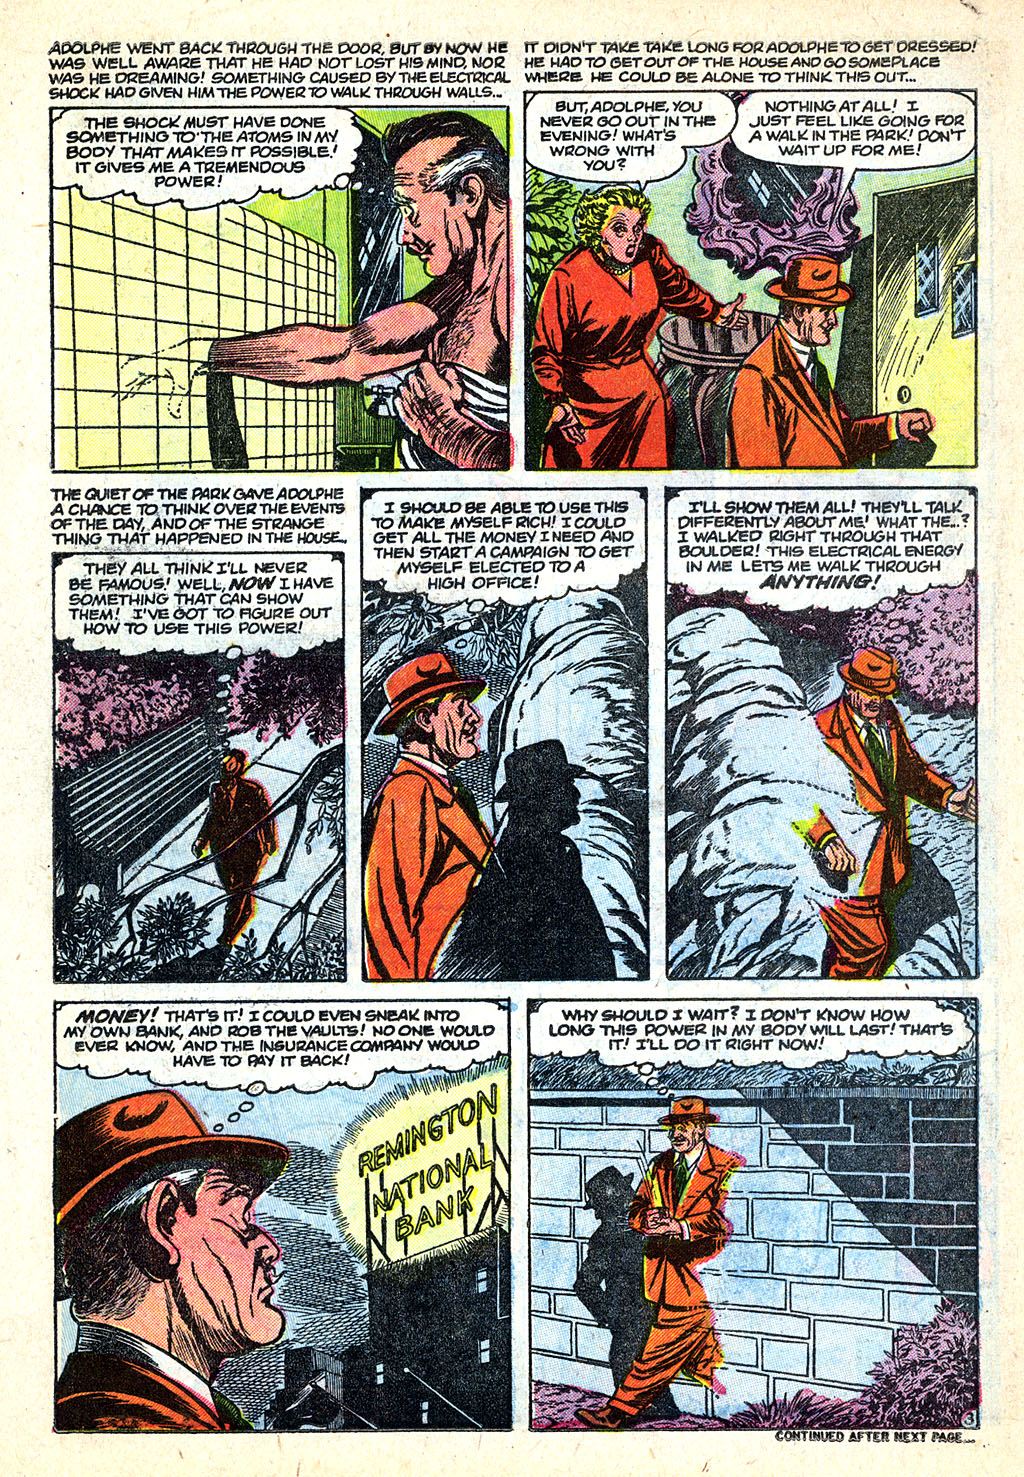 Marvel Tales (1949) 127 Page 17